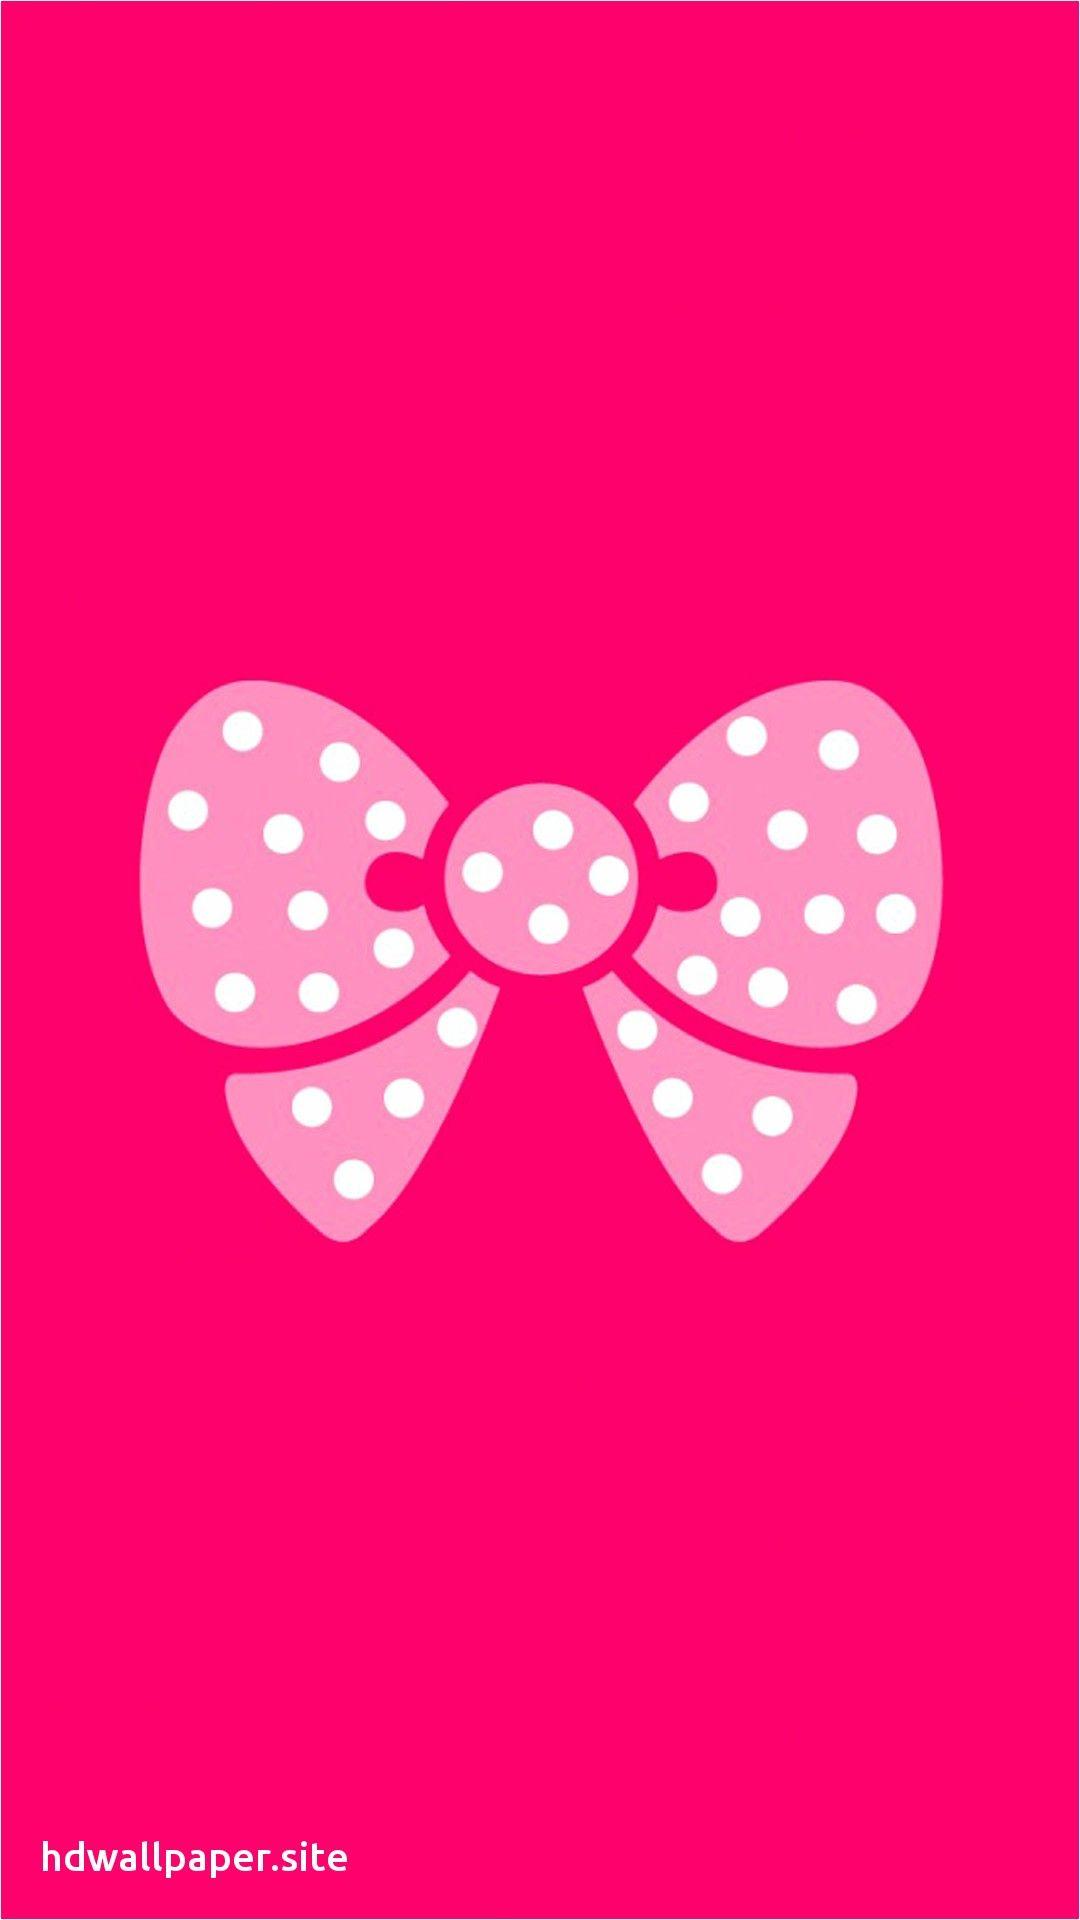 New Wallpaper Cute Pink for iPhone 6